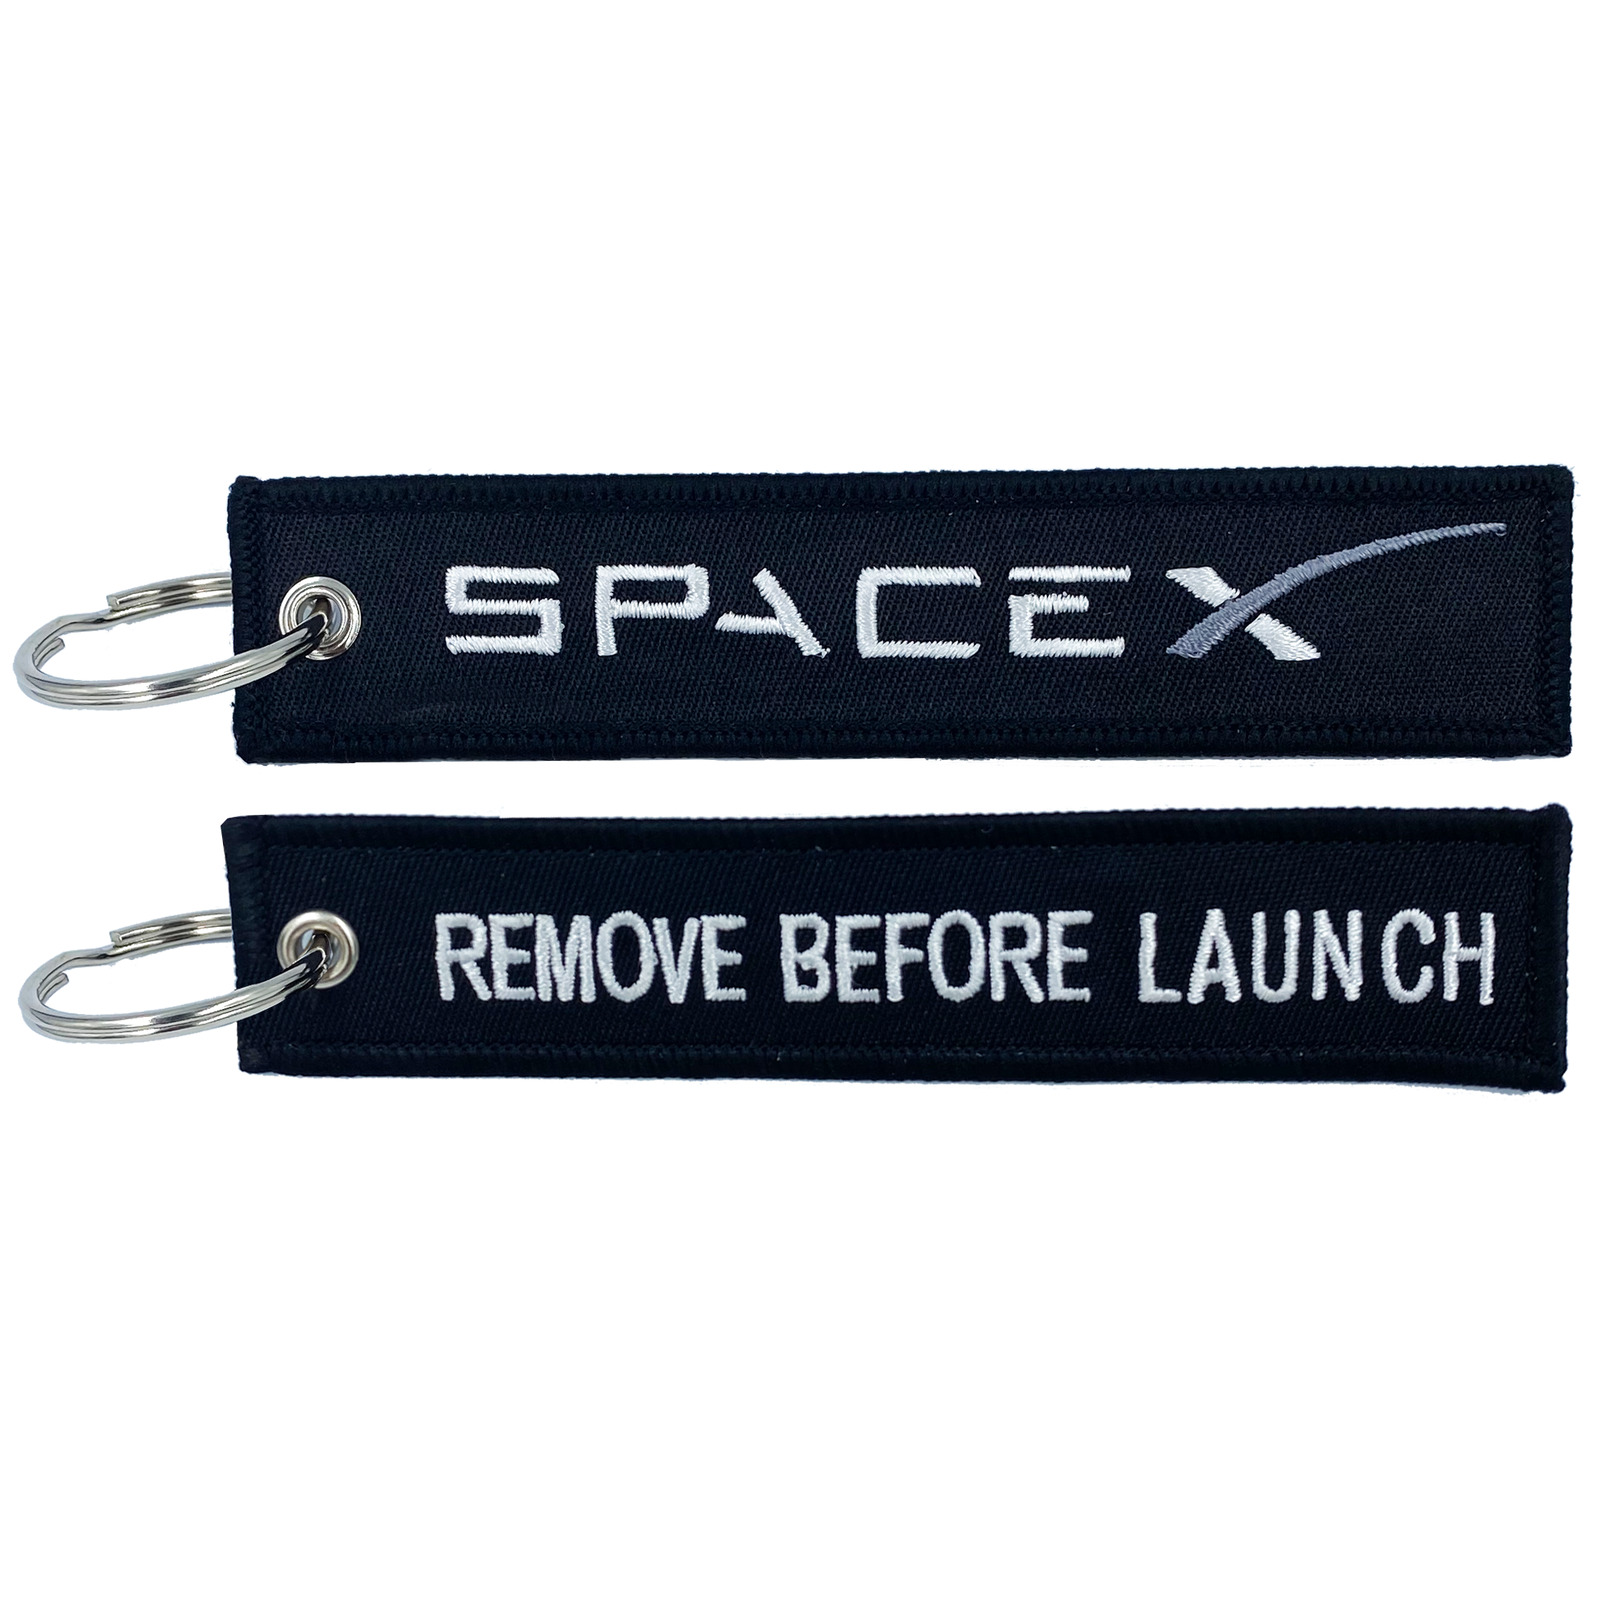 CL4-06 BLACK SpaceX REMOVE BEFORE LAUNCH Luggage Tag zipper pull keychain Space